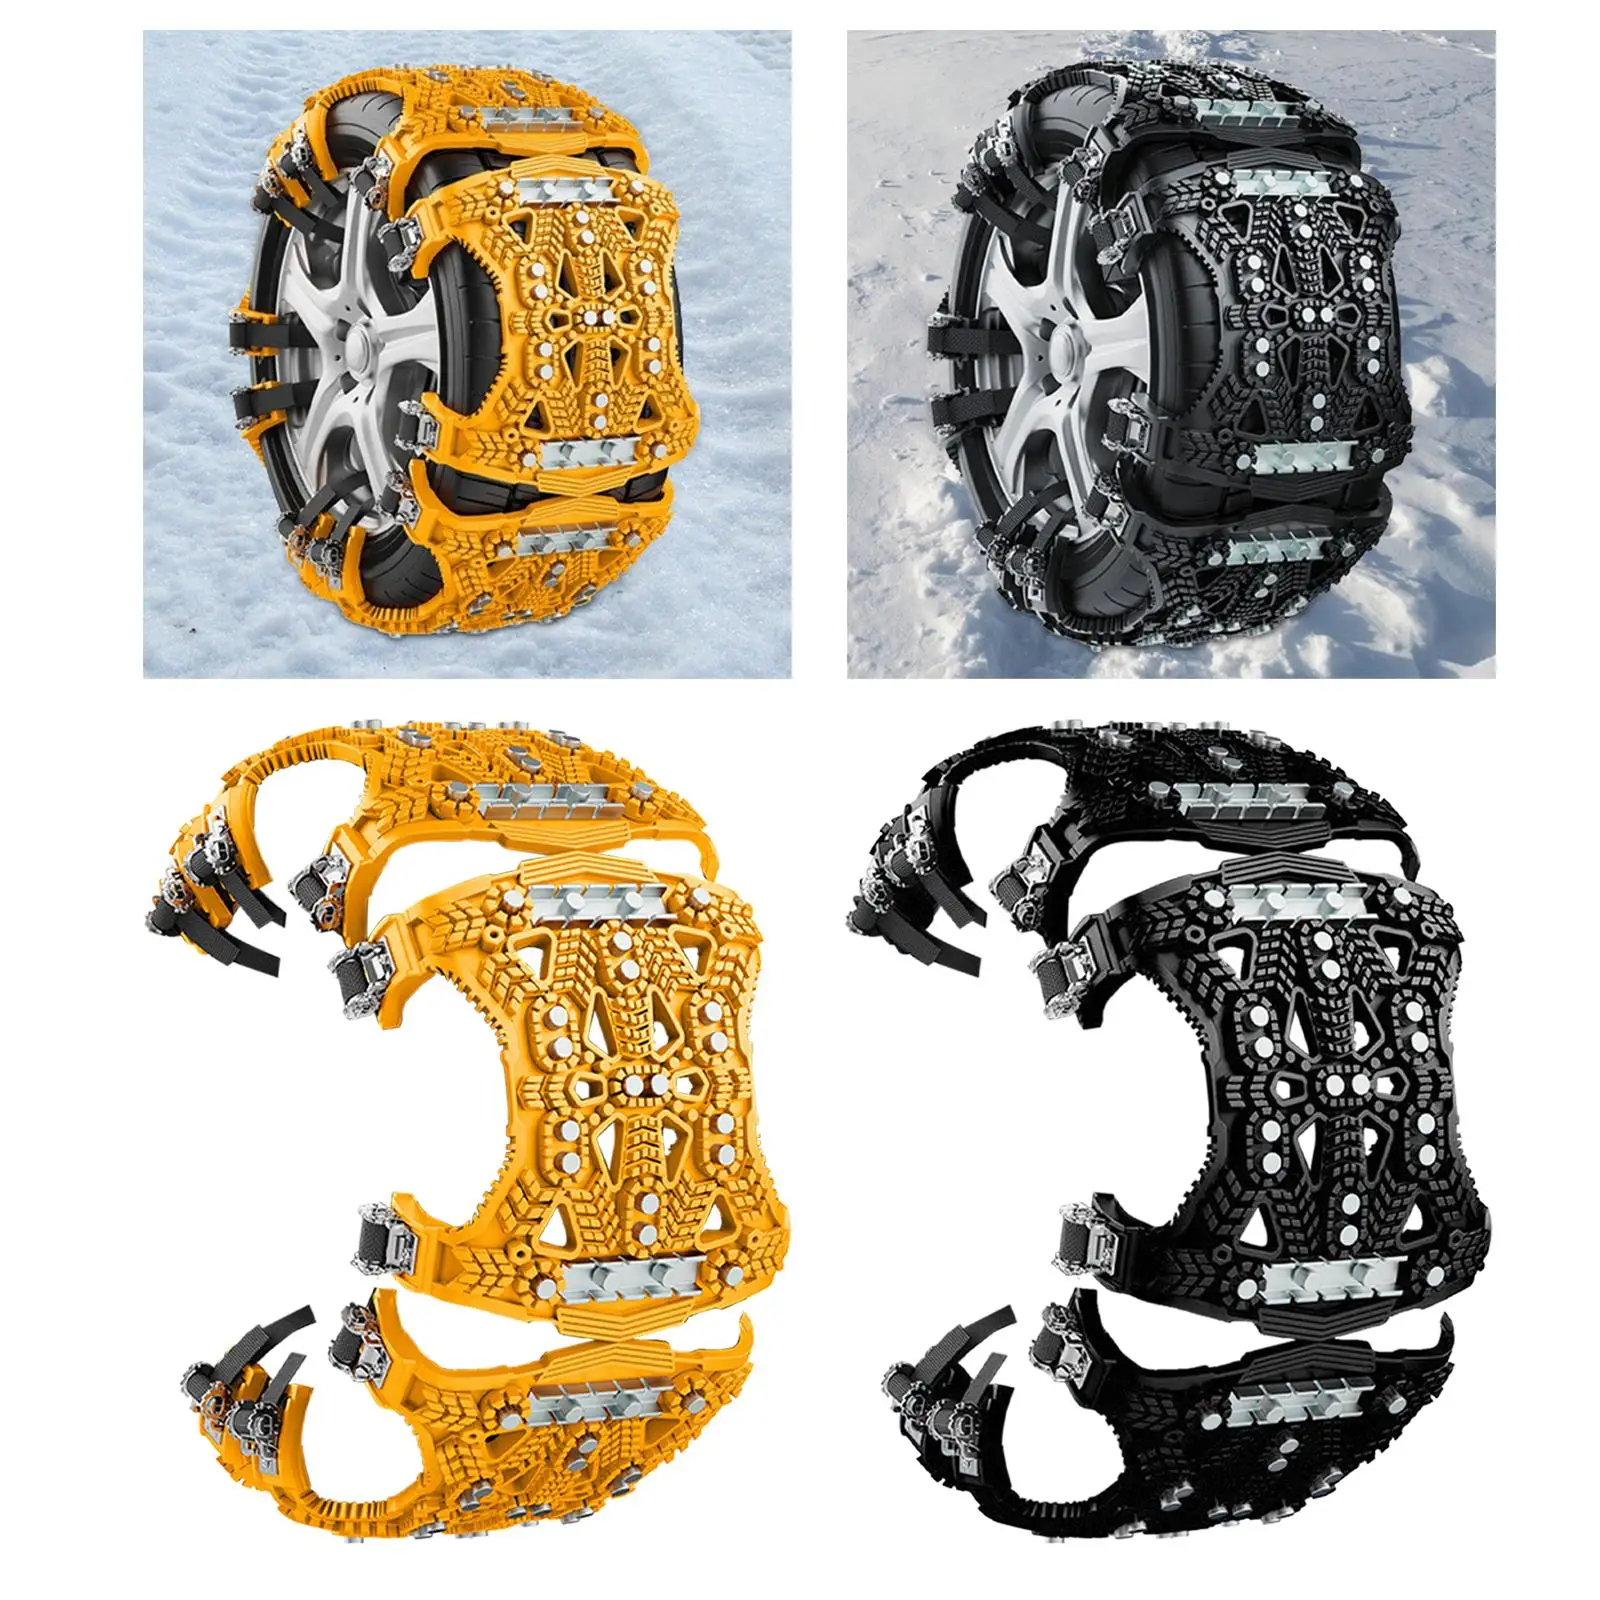 Car Tyres Anti Slip Snow Chain Portable for Emergency Traction Sturdy